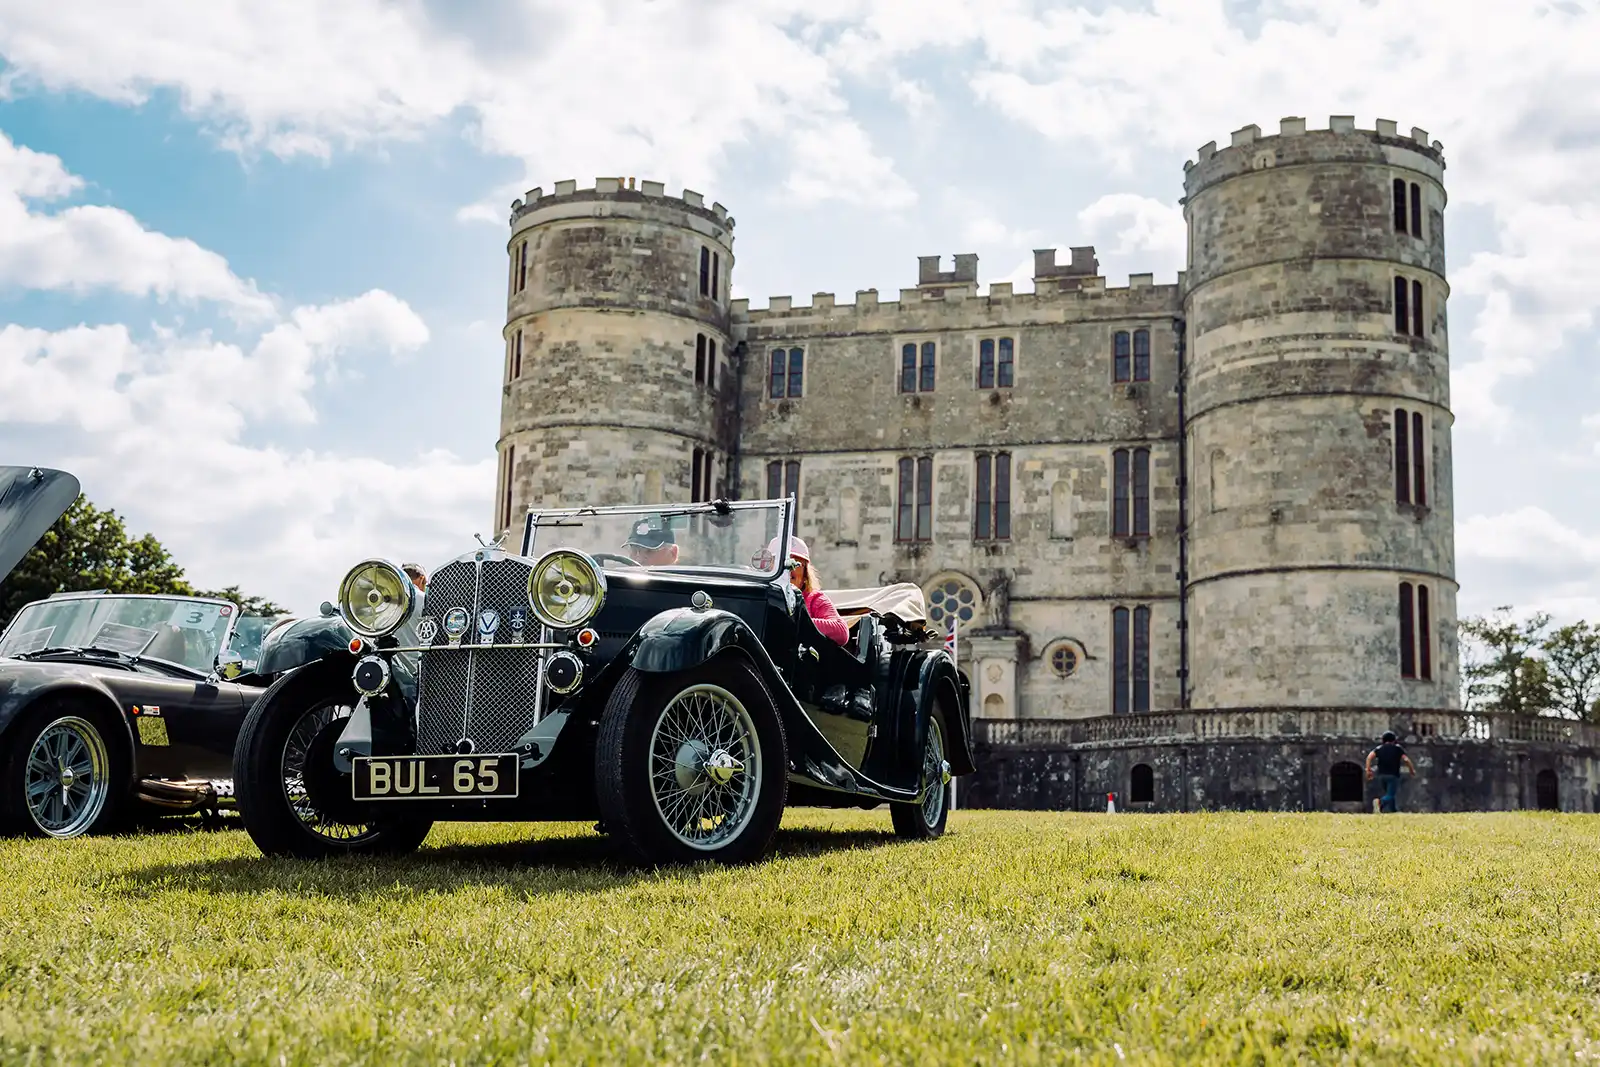 Hundreds of classic and supercars will be on show